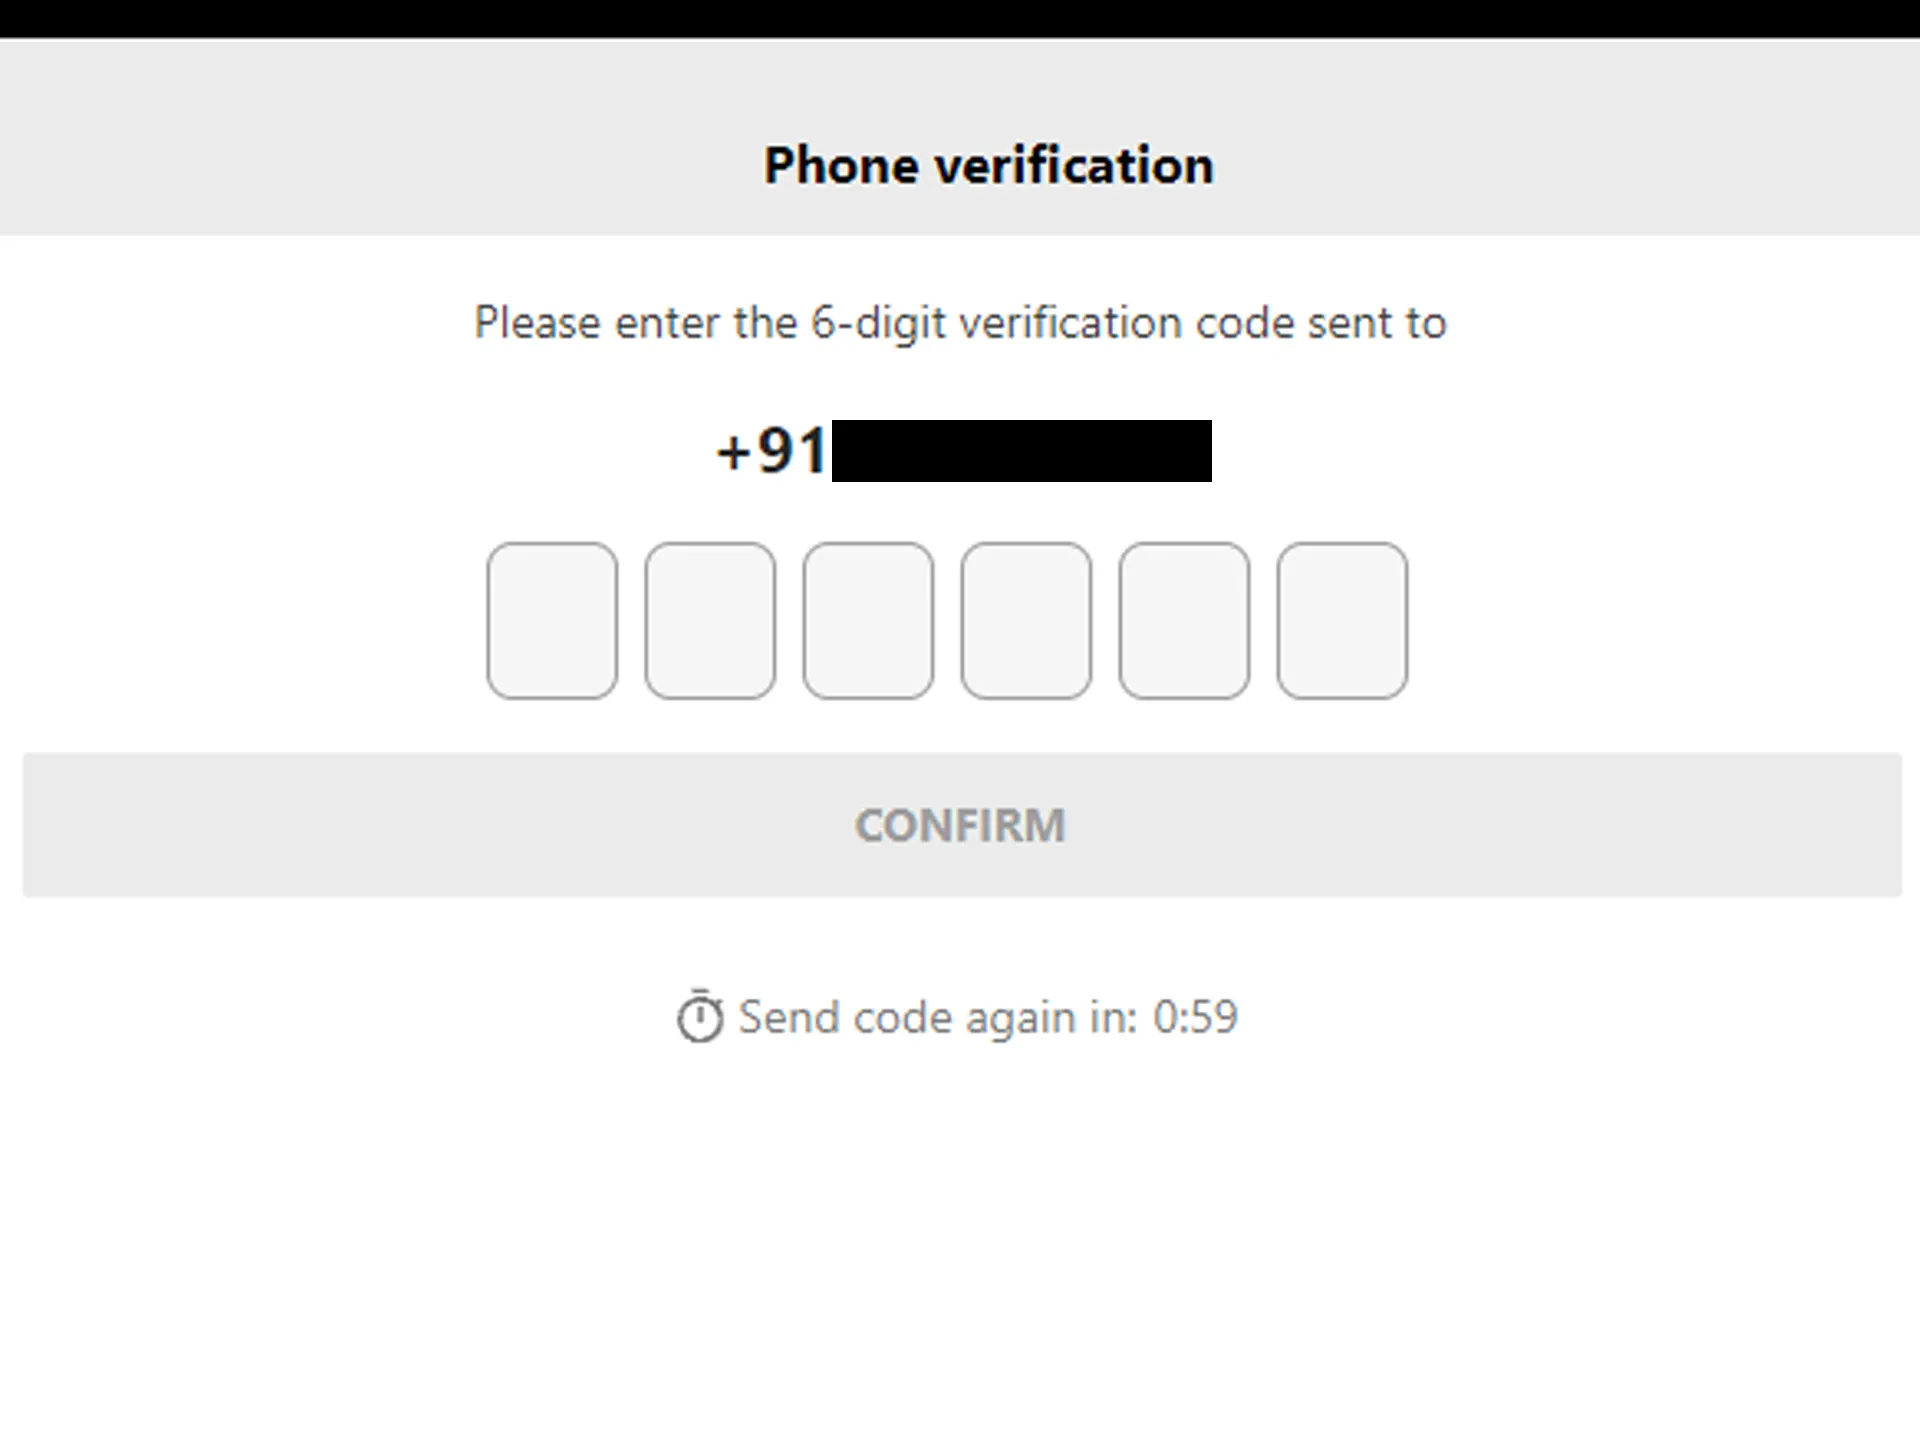 Confirm the registration with an SMS code.